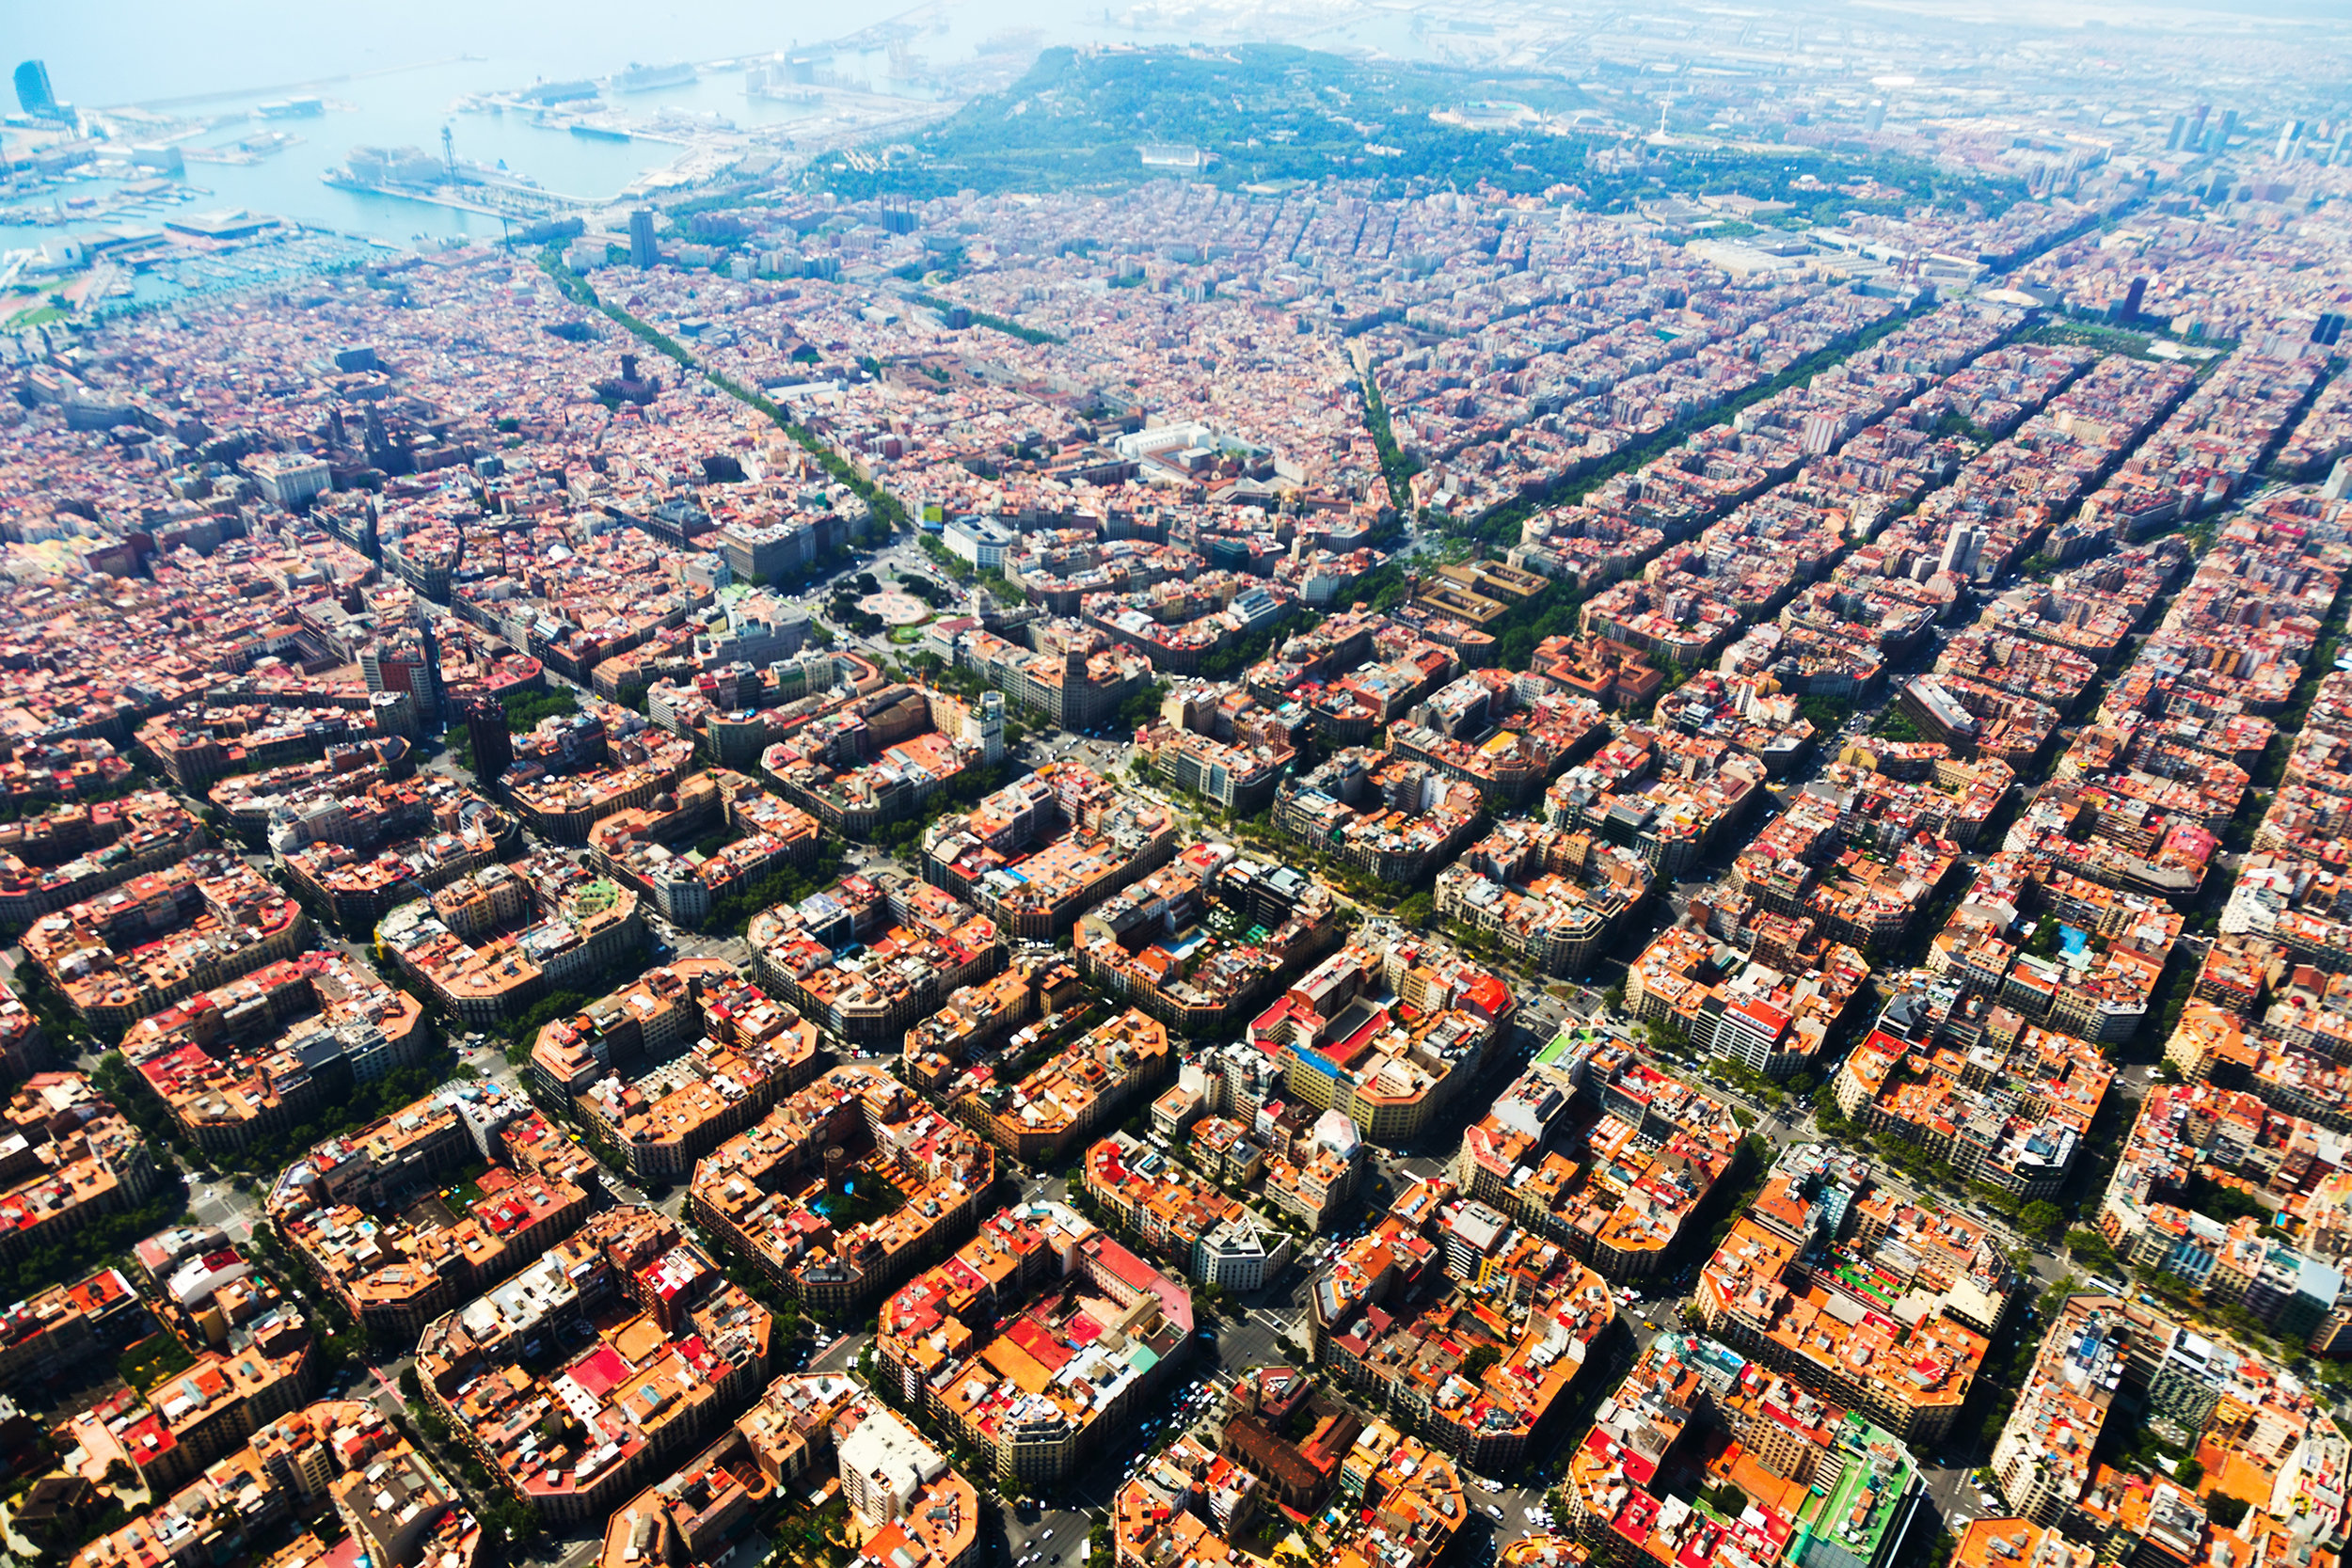 Aerial-view-of-Barcelona-cityscape-from-helicopter-509389015_2550x1700.jpeg